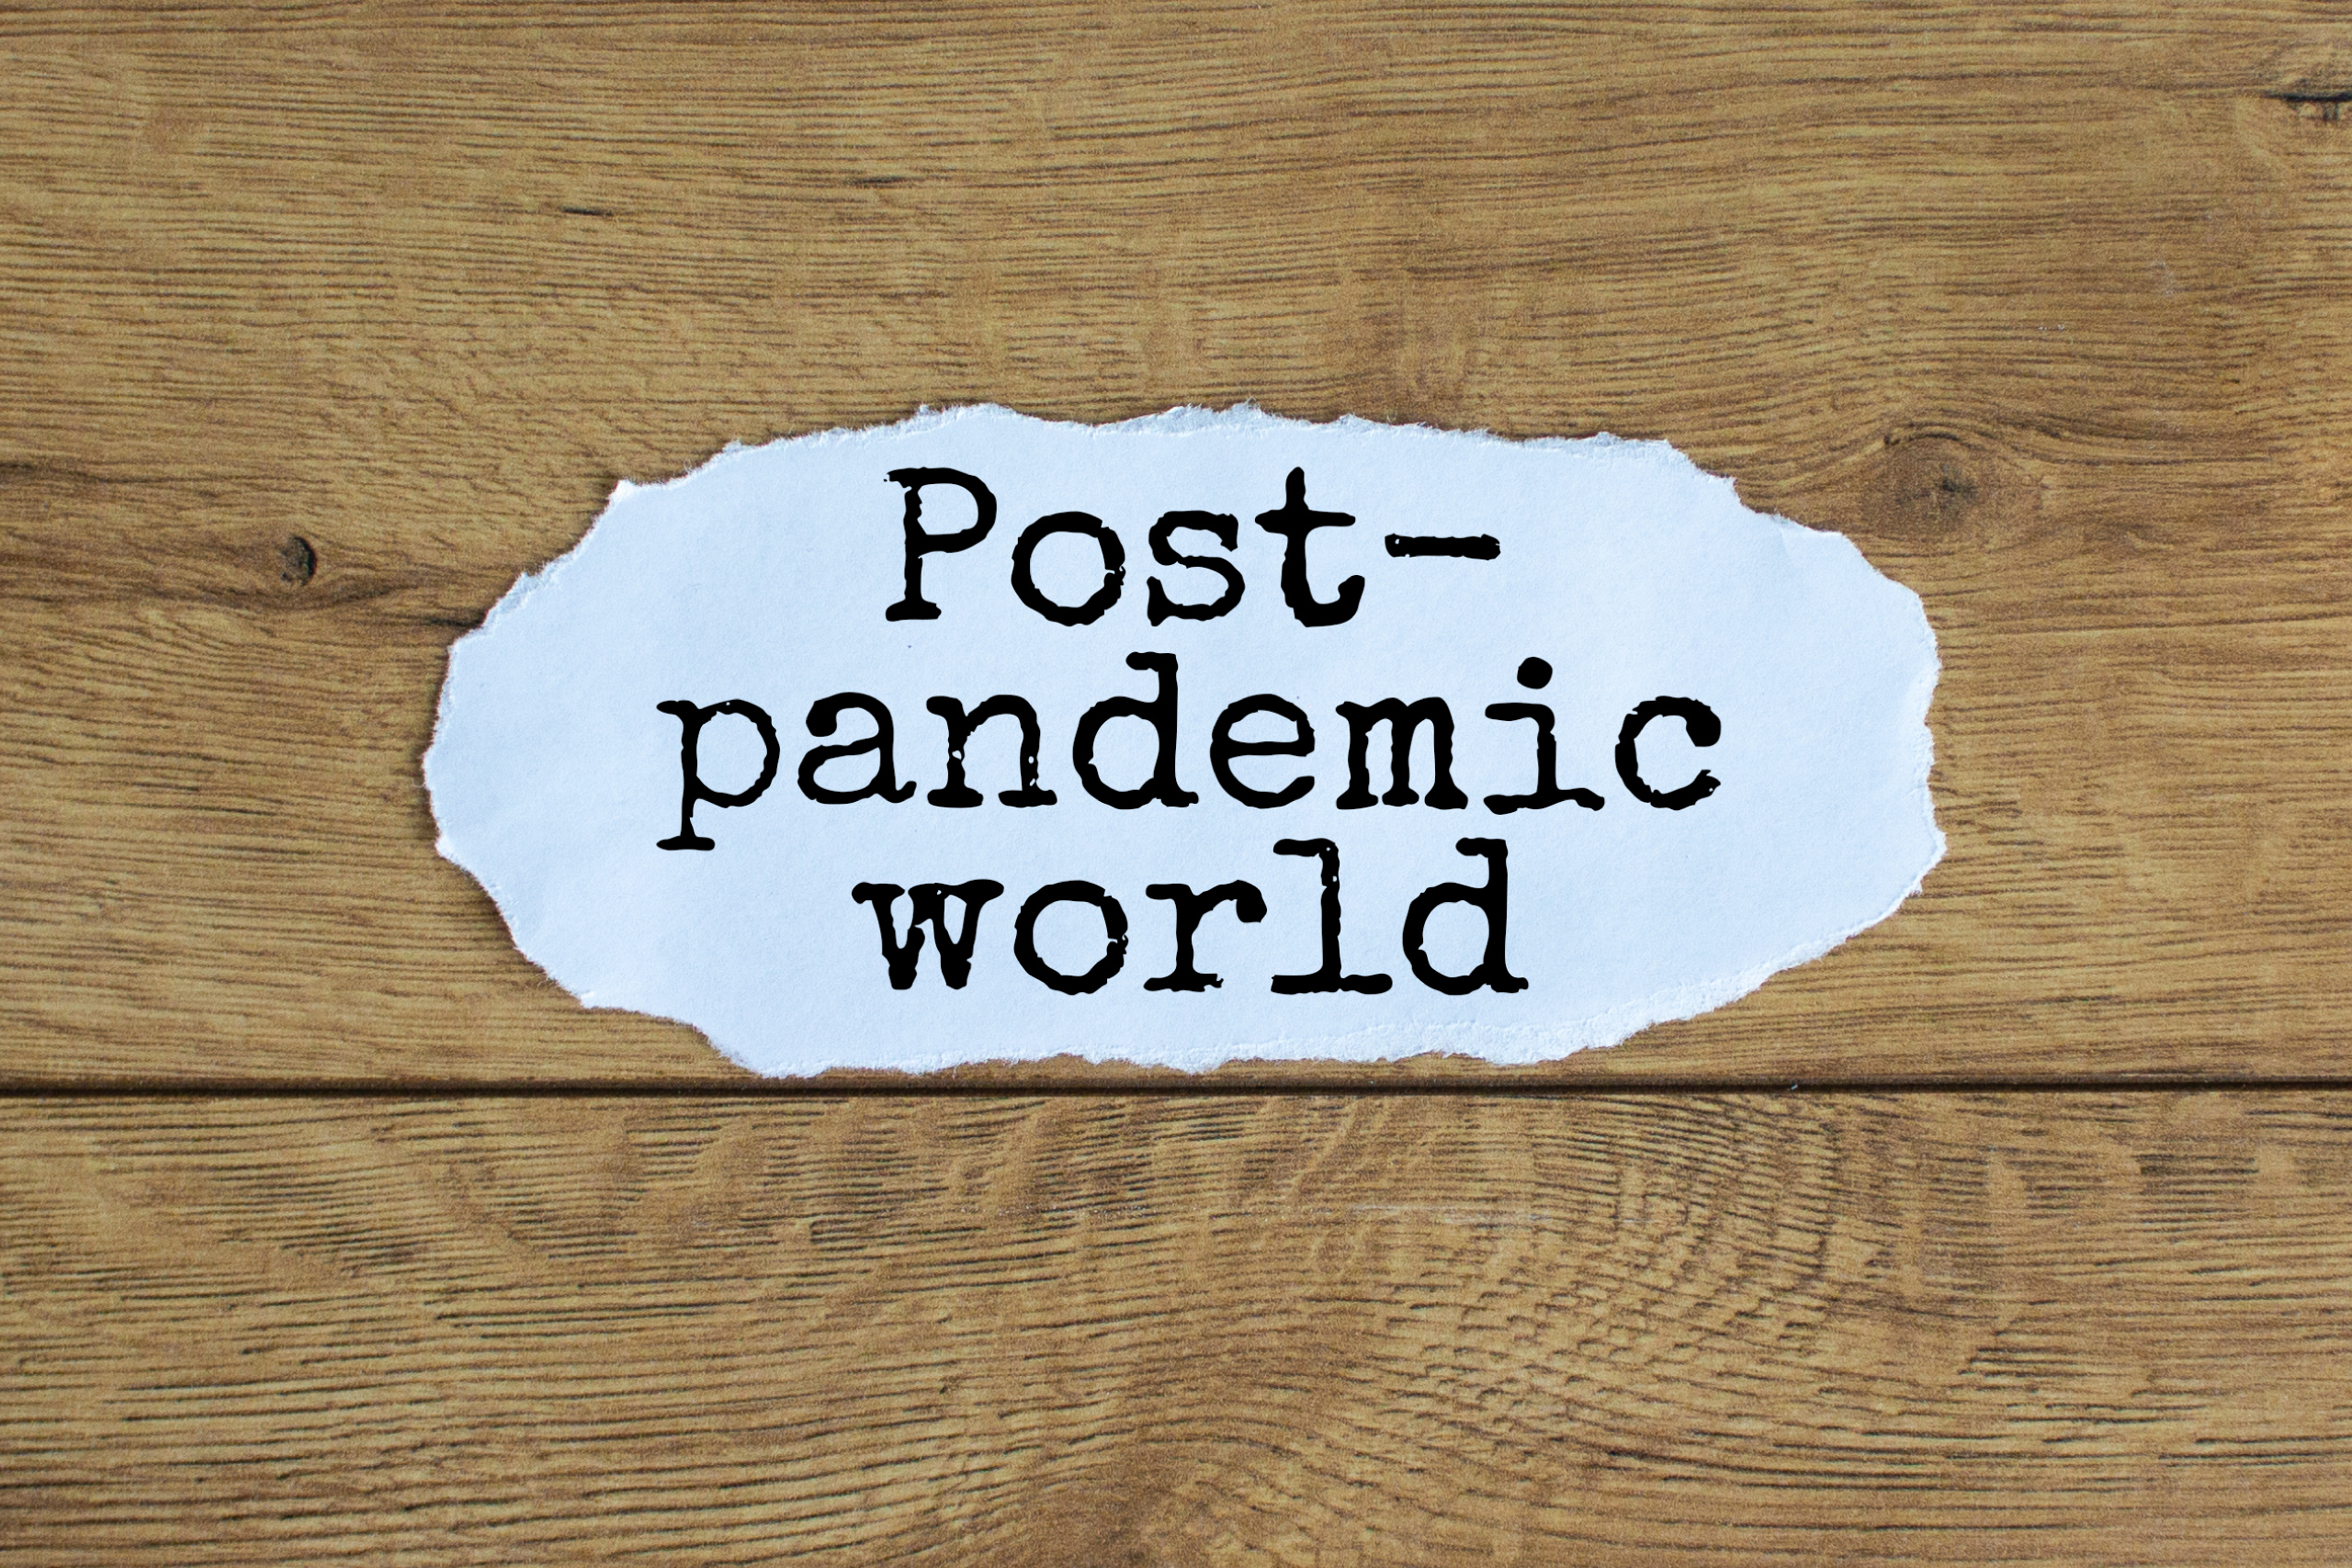 MICE Events: Meetings in a Post-Pandemic World